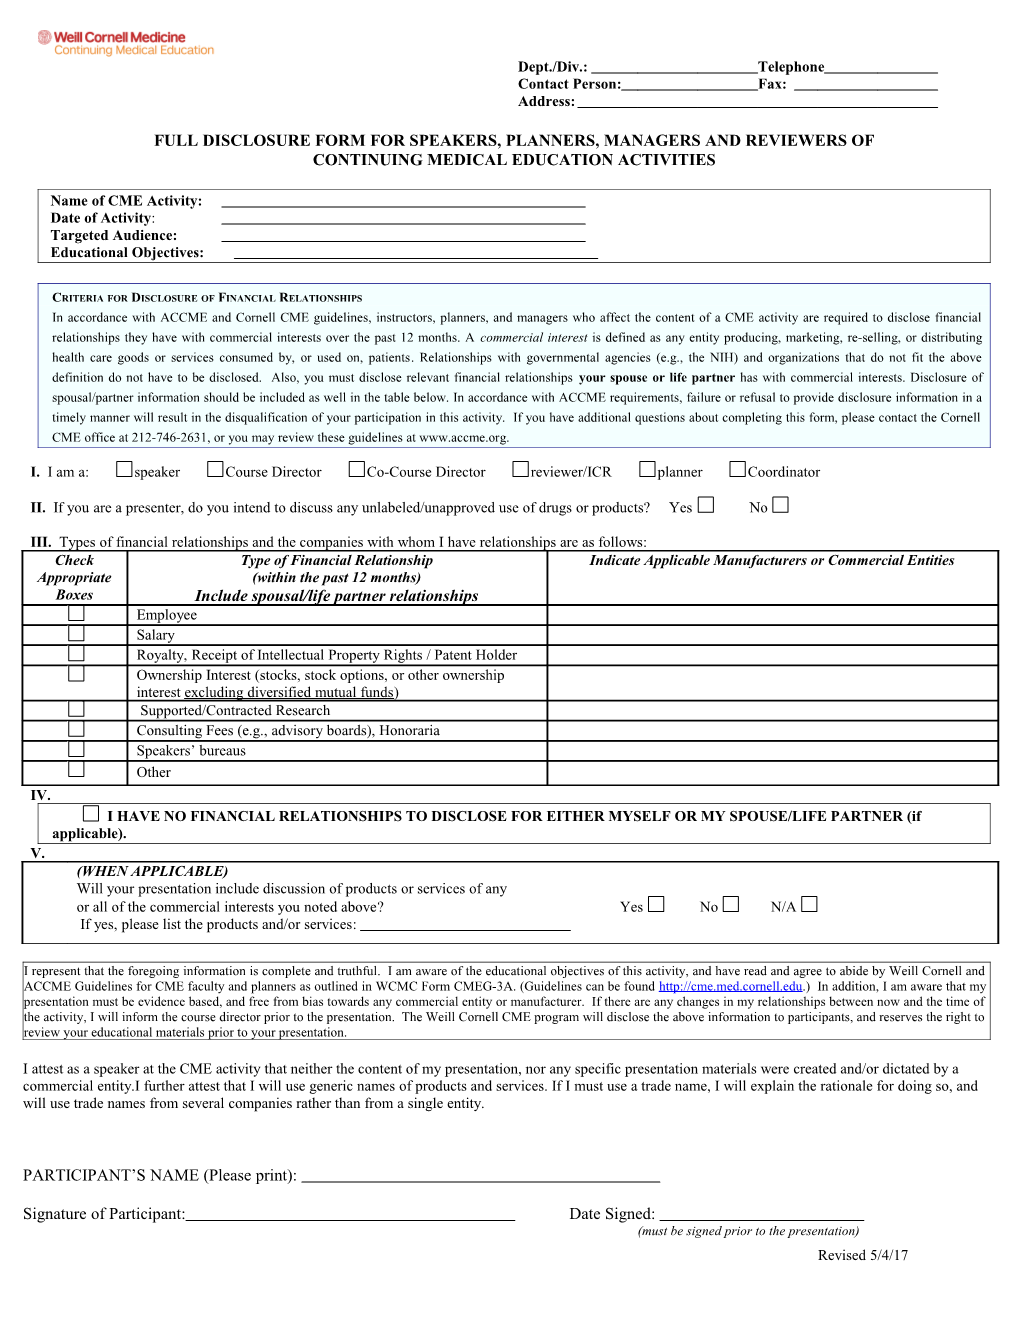 FACULTY DISCLOSURE GUIDELINES and FORM